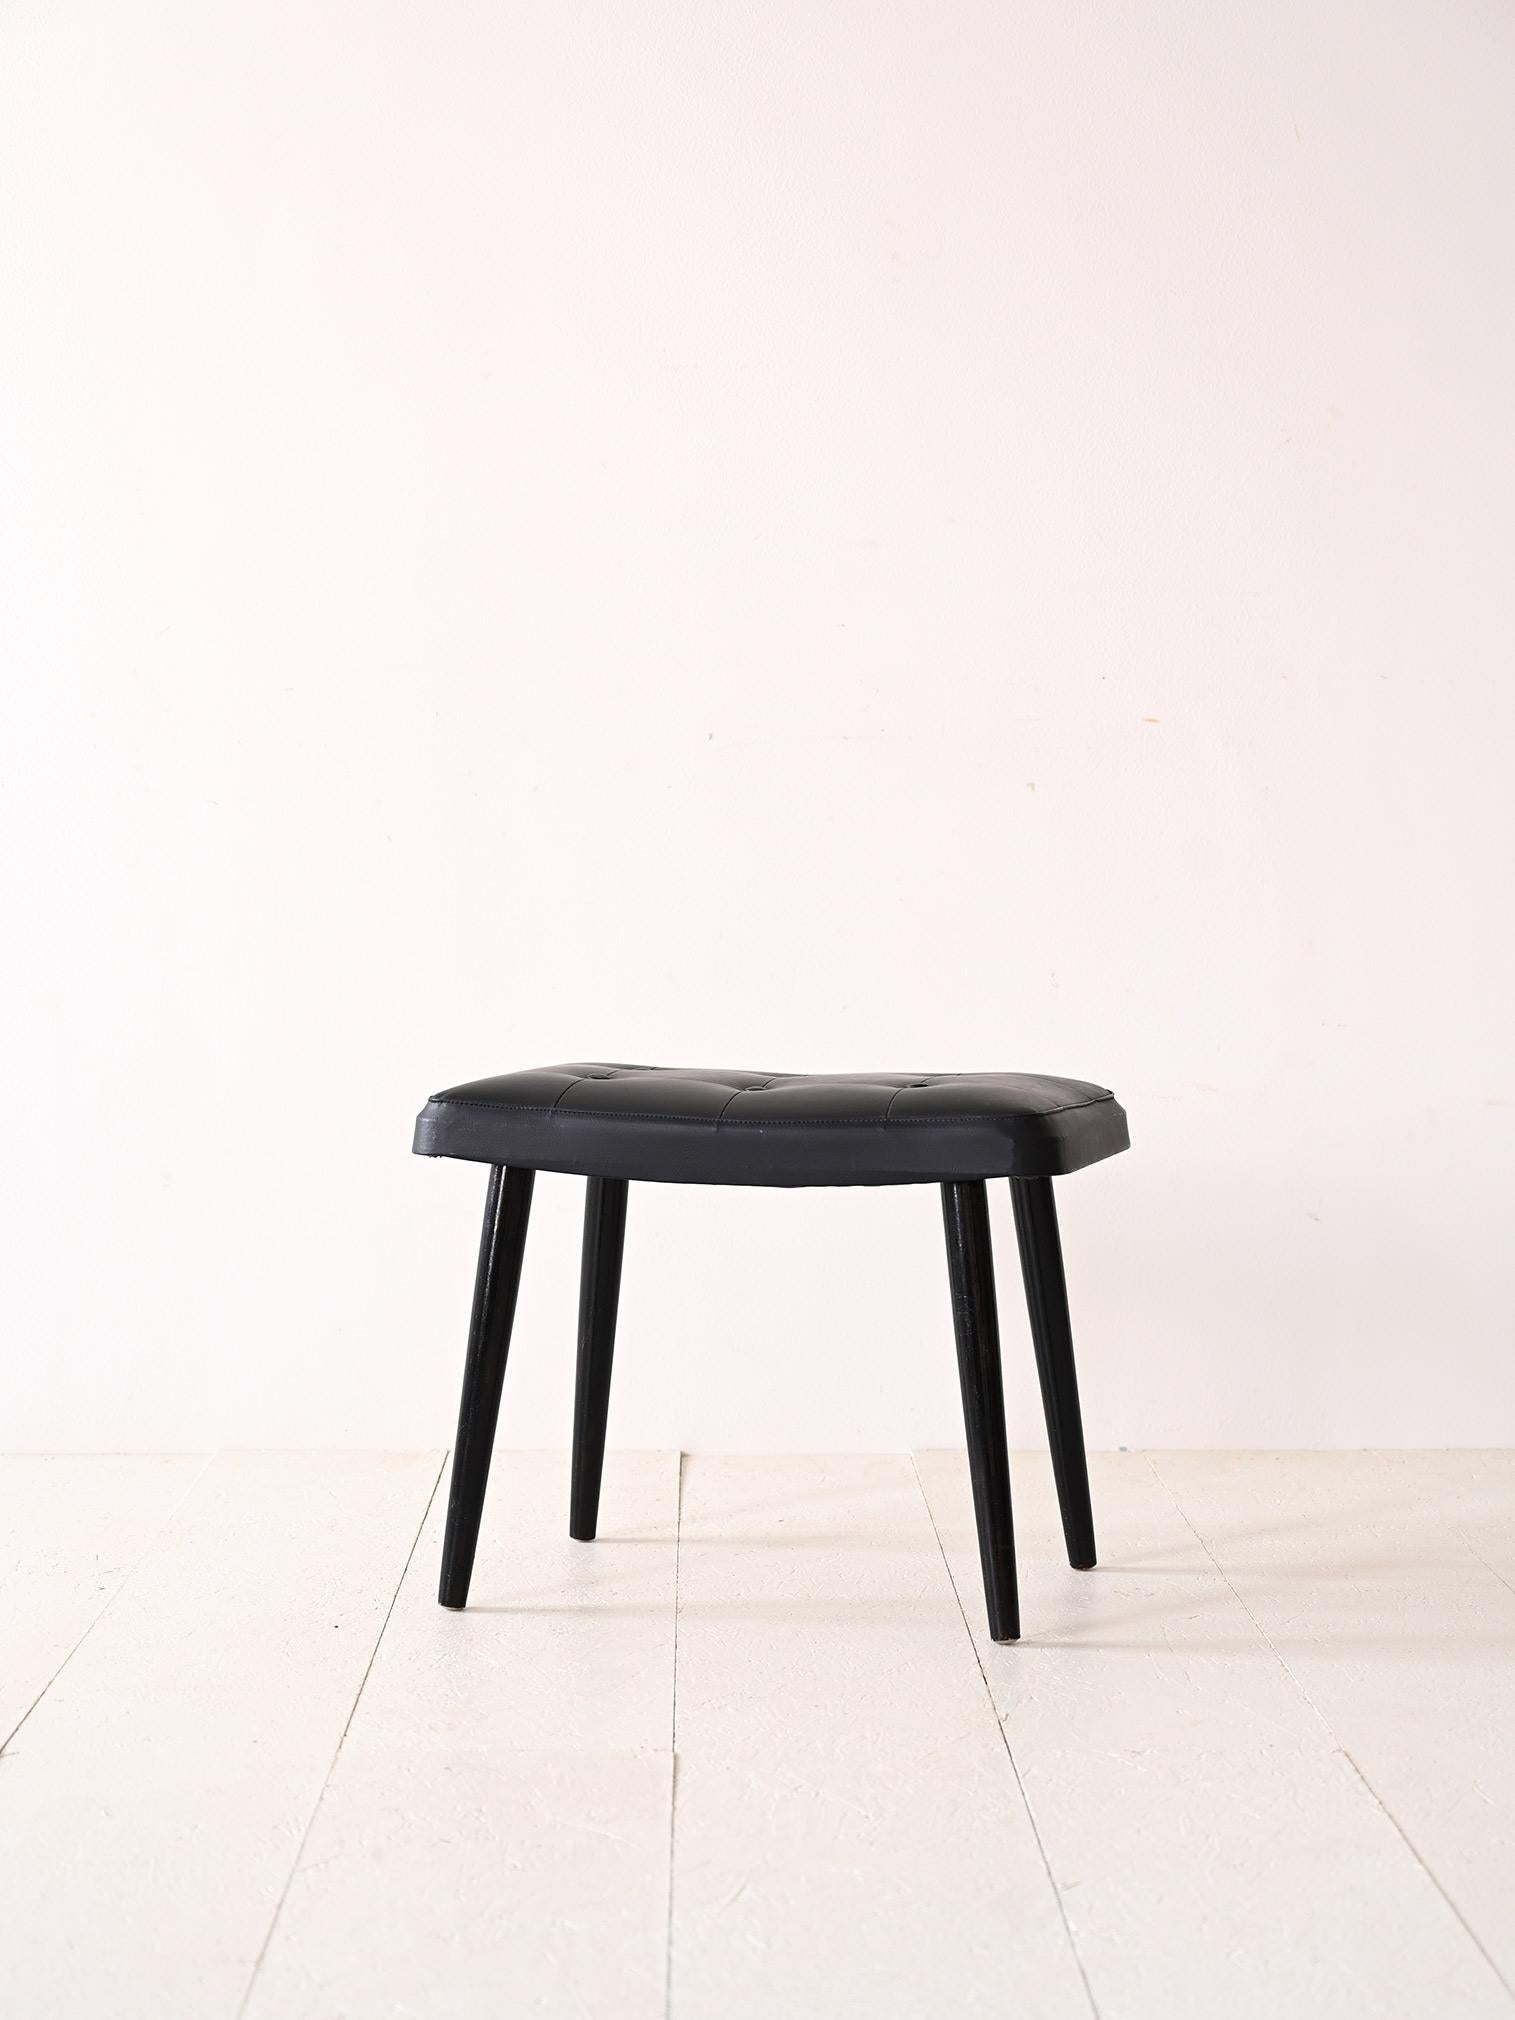 1960s Scandinavian stool.

Modern footstool consisting of a wooden base with tapered legs and an upholstered seat reupholstered with black leatherette.
The minimal and elegant lines also make it suitable for different types of interiors; it will add